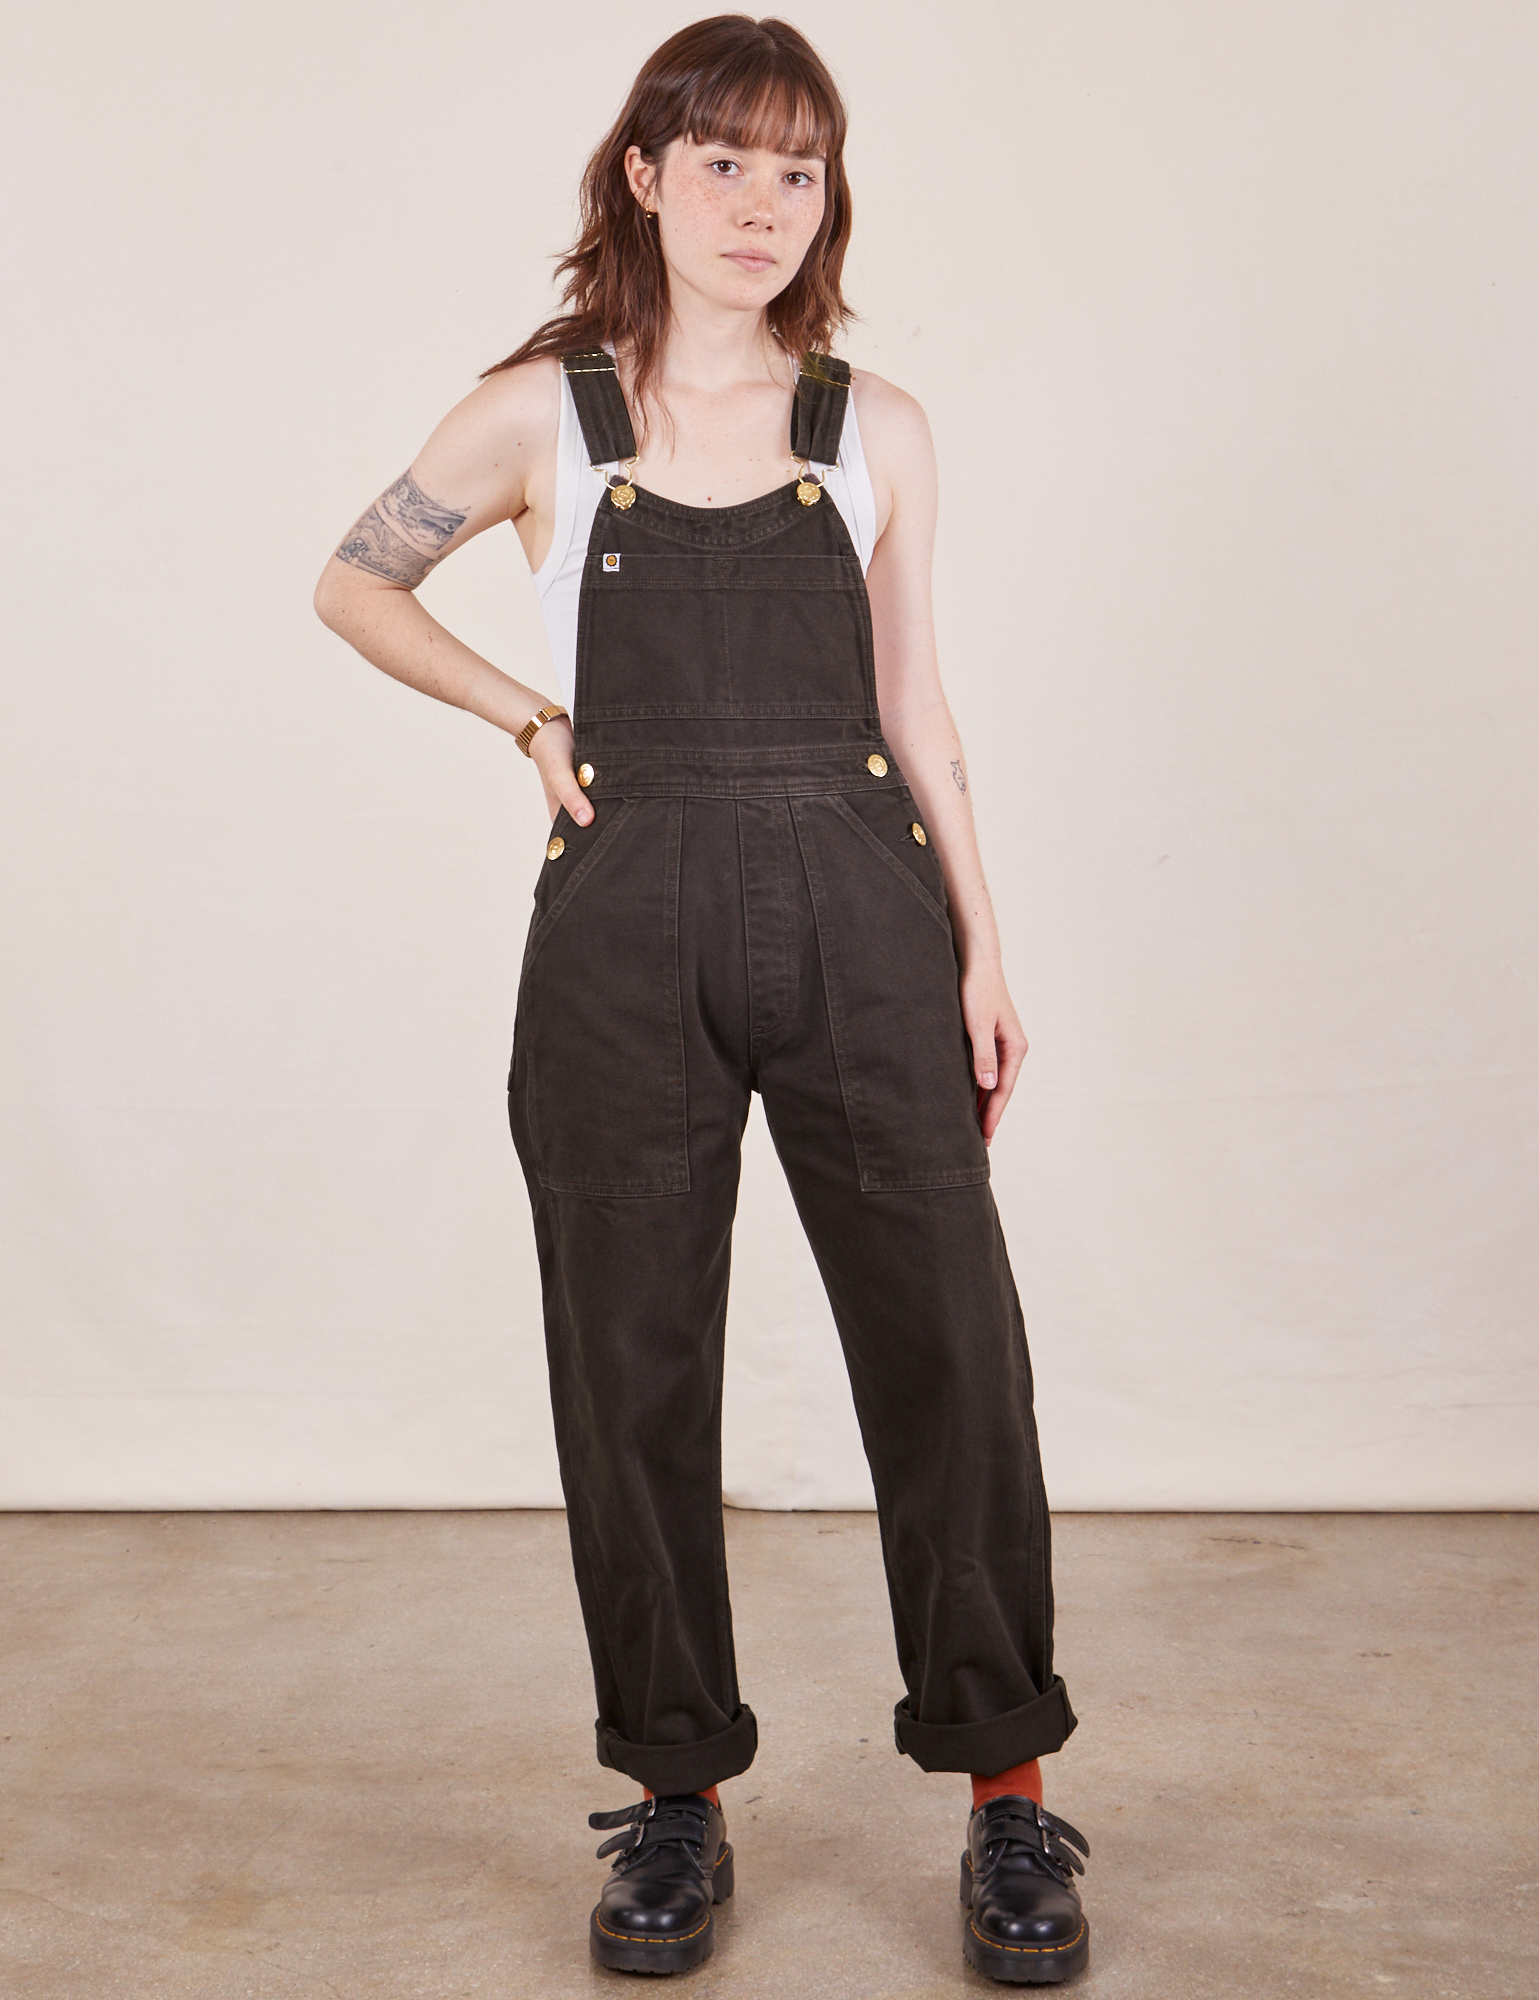 Hana is 5&#39;3&quot; and wearing size P Original Overalls in Mono Espresso with a Cropped Tank Top in vintage tee off-white